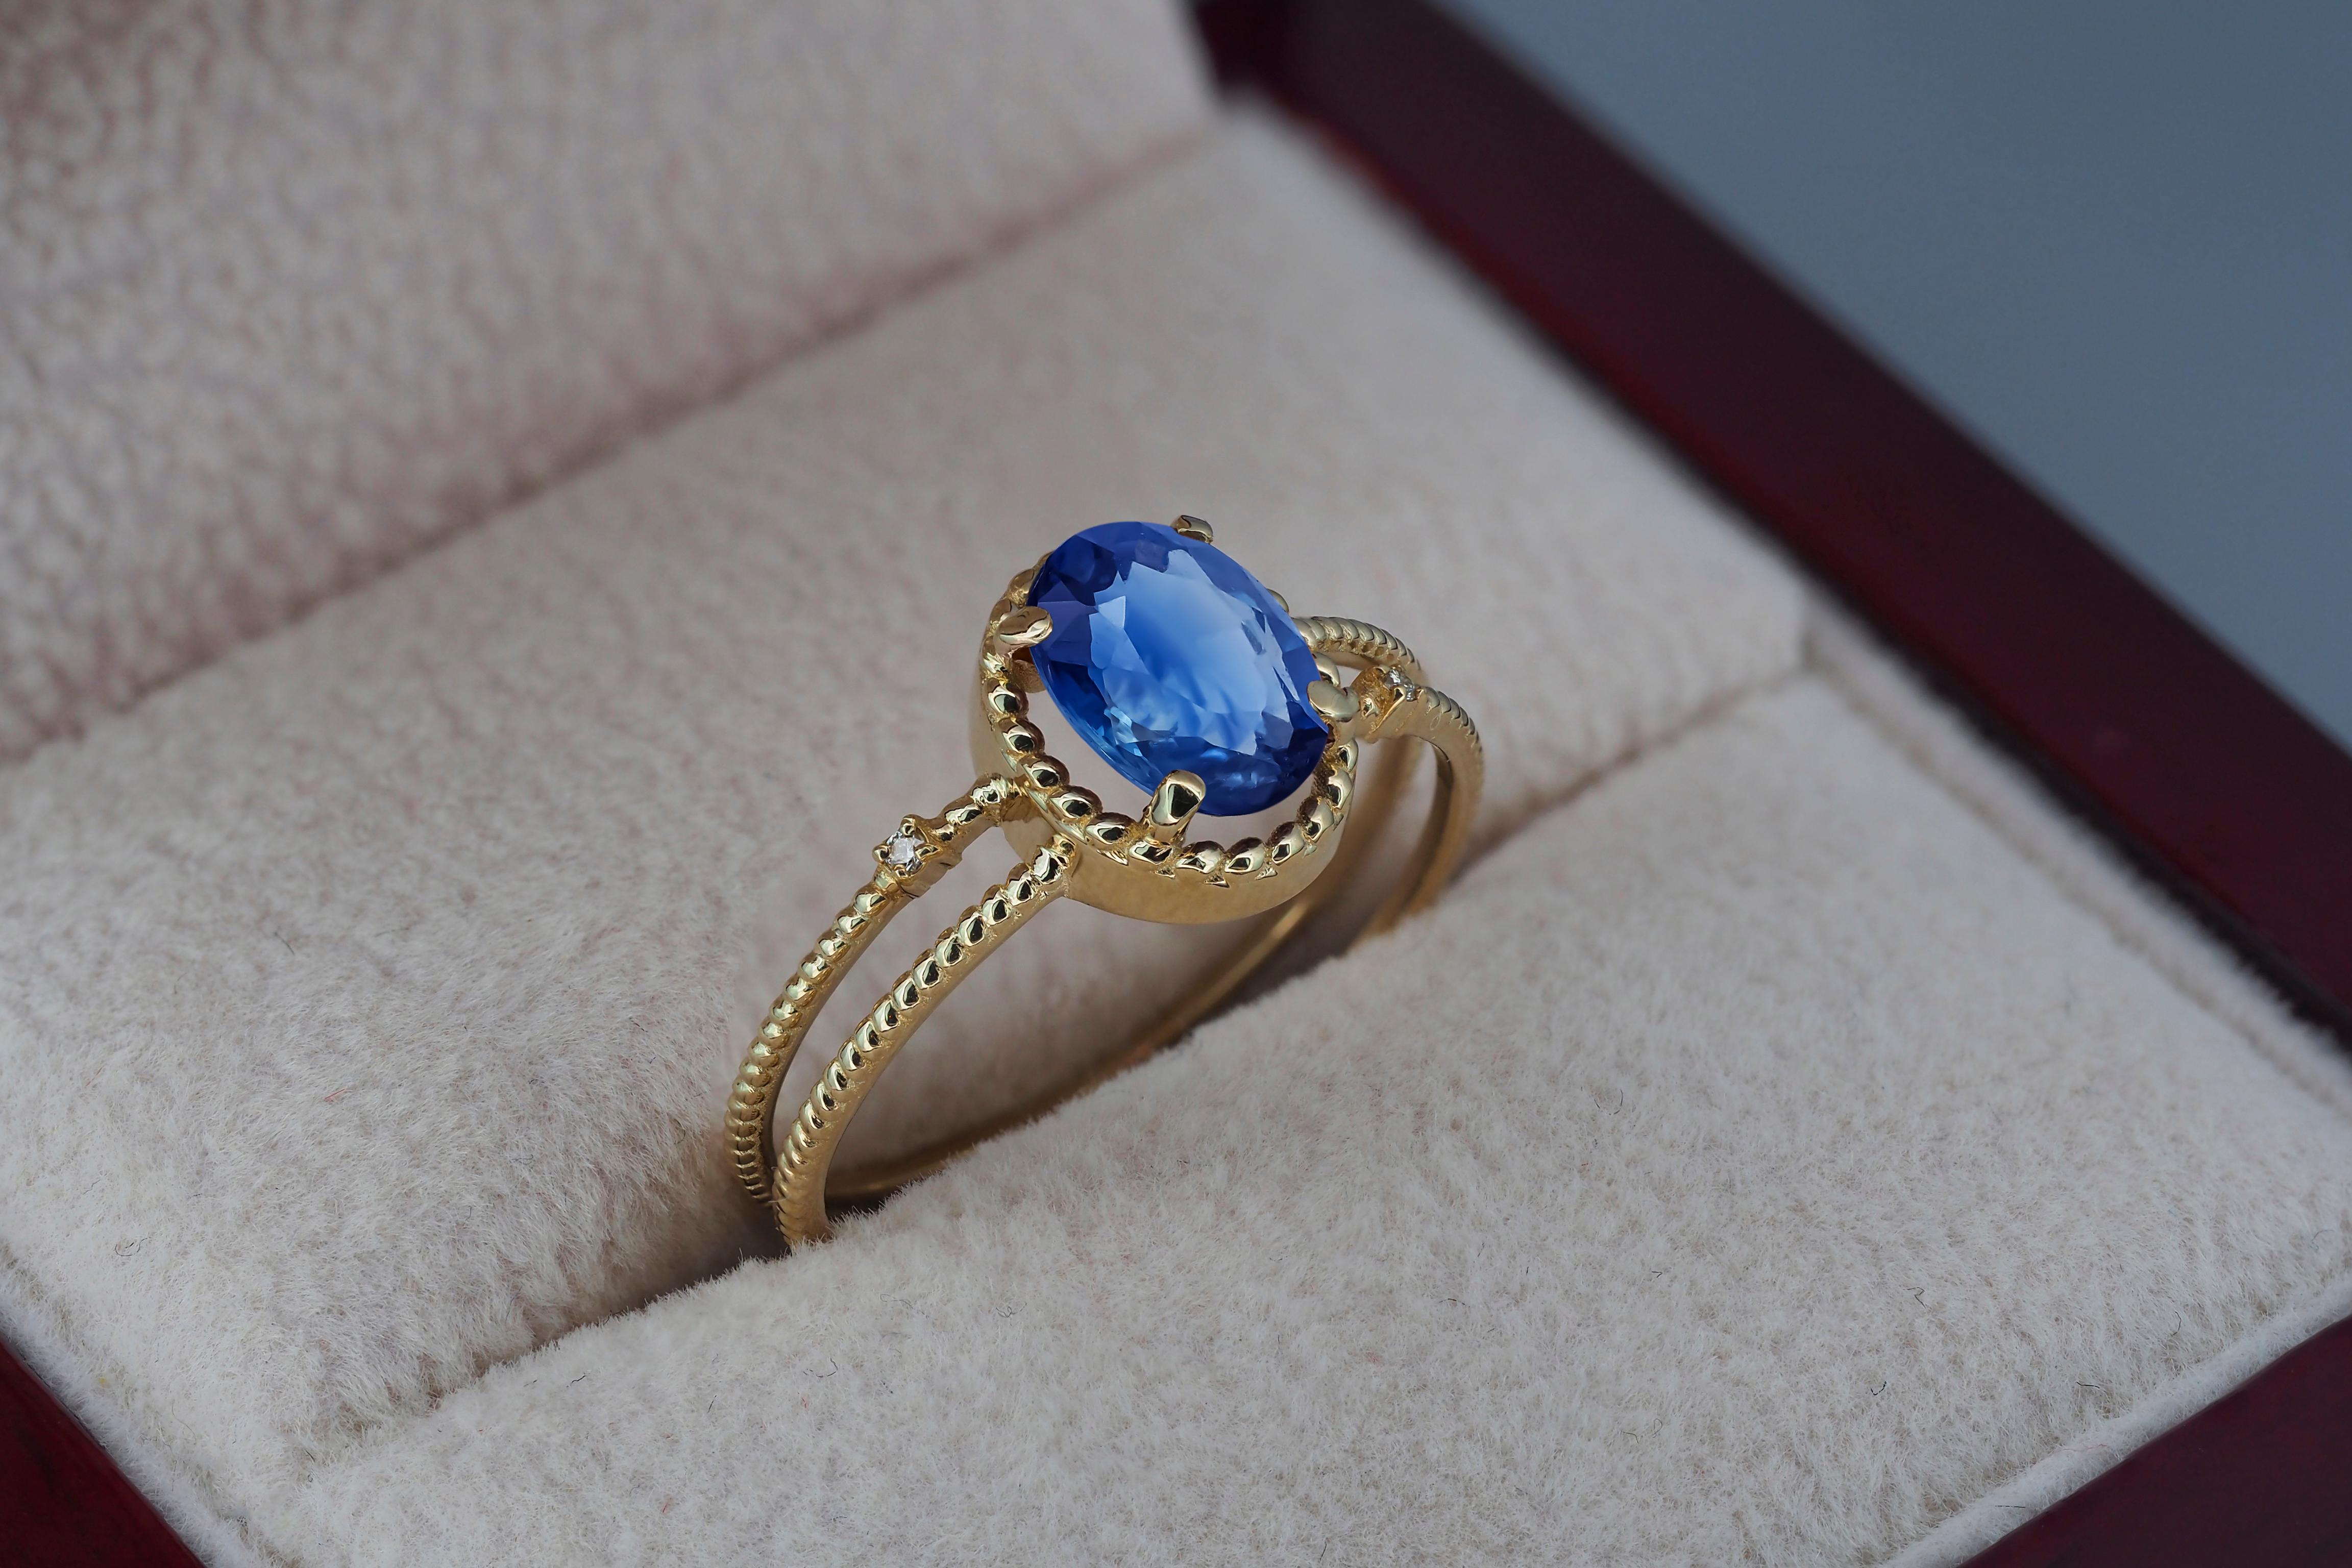 Women's Sapphire Gold Ring, Oval Sapphire Ring, 14k Gold Ring with Sapphire For Sale